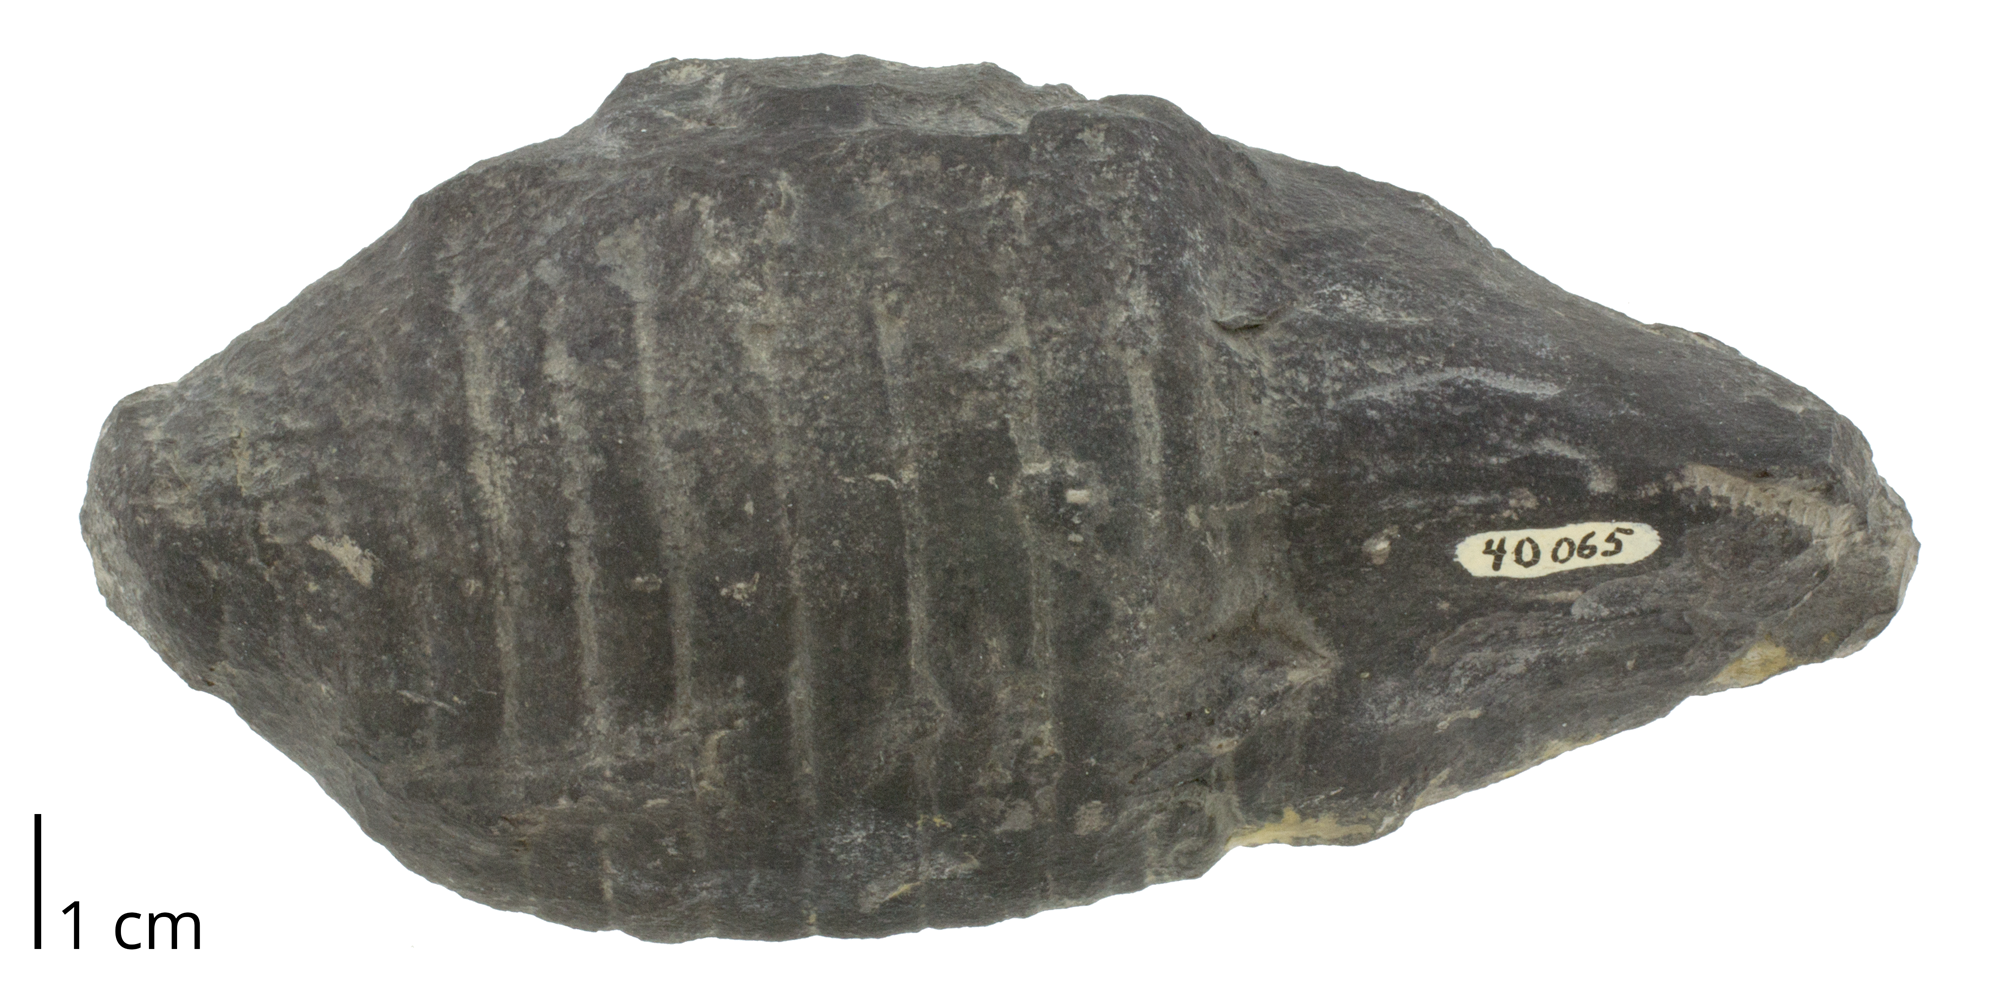 Fossil cephalopod Acleistoceras fischeri from the Devonian Cherry Valley Limestone of Otsego County, New York. The shell of this species is a brevicone.